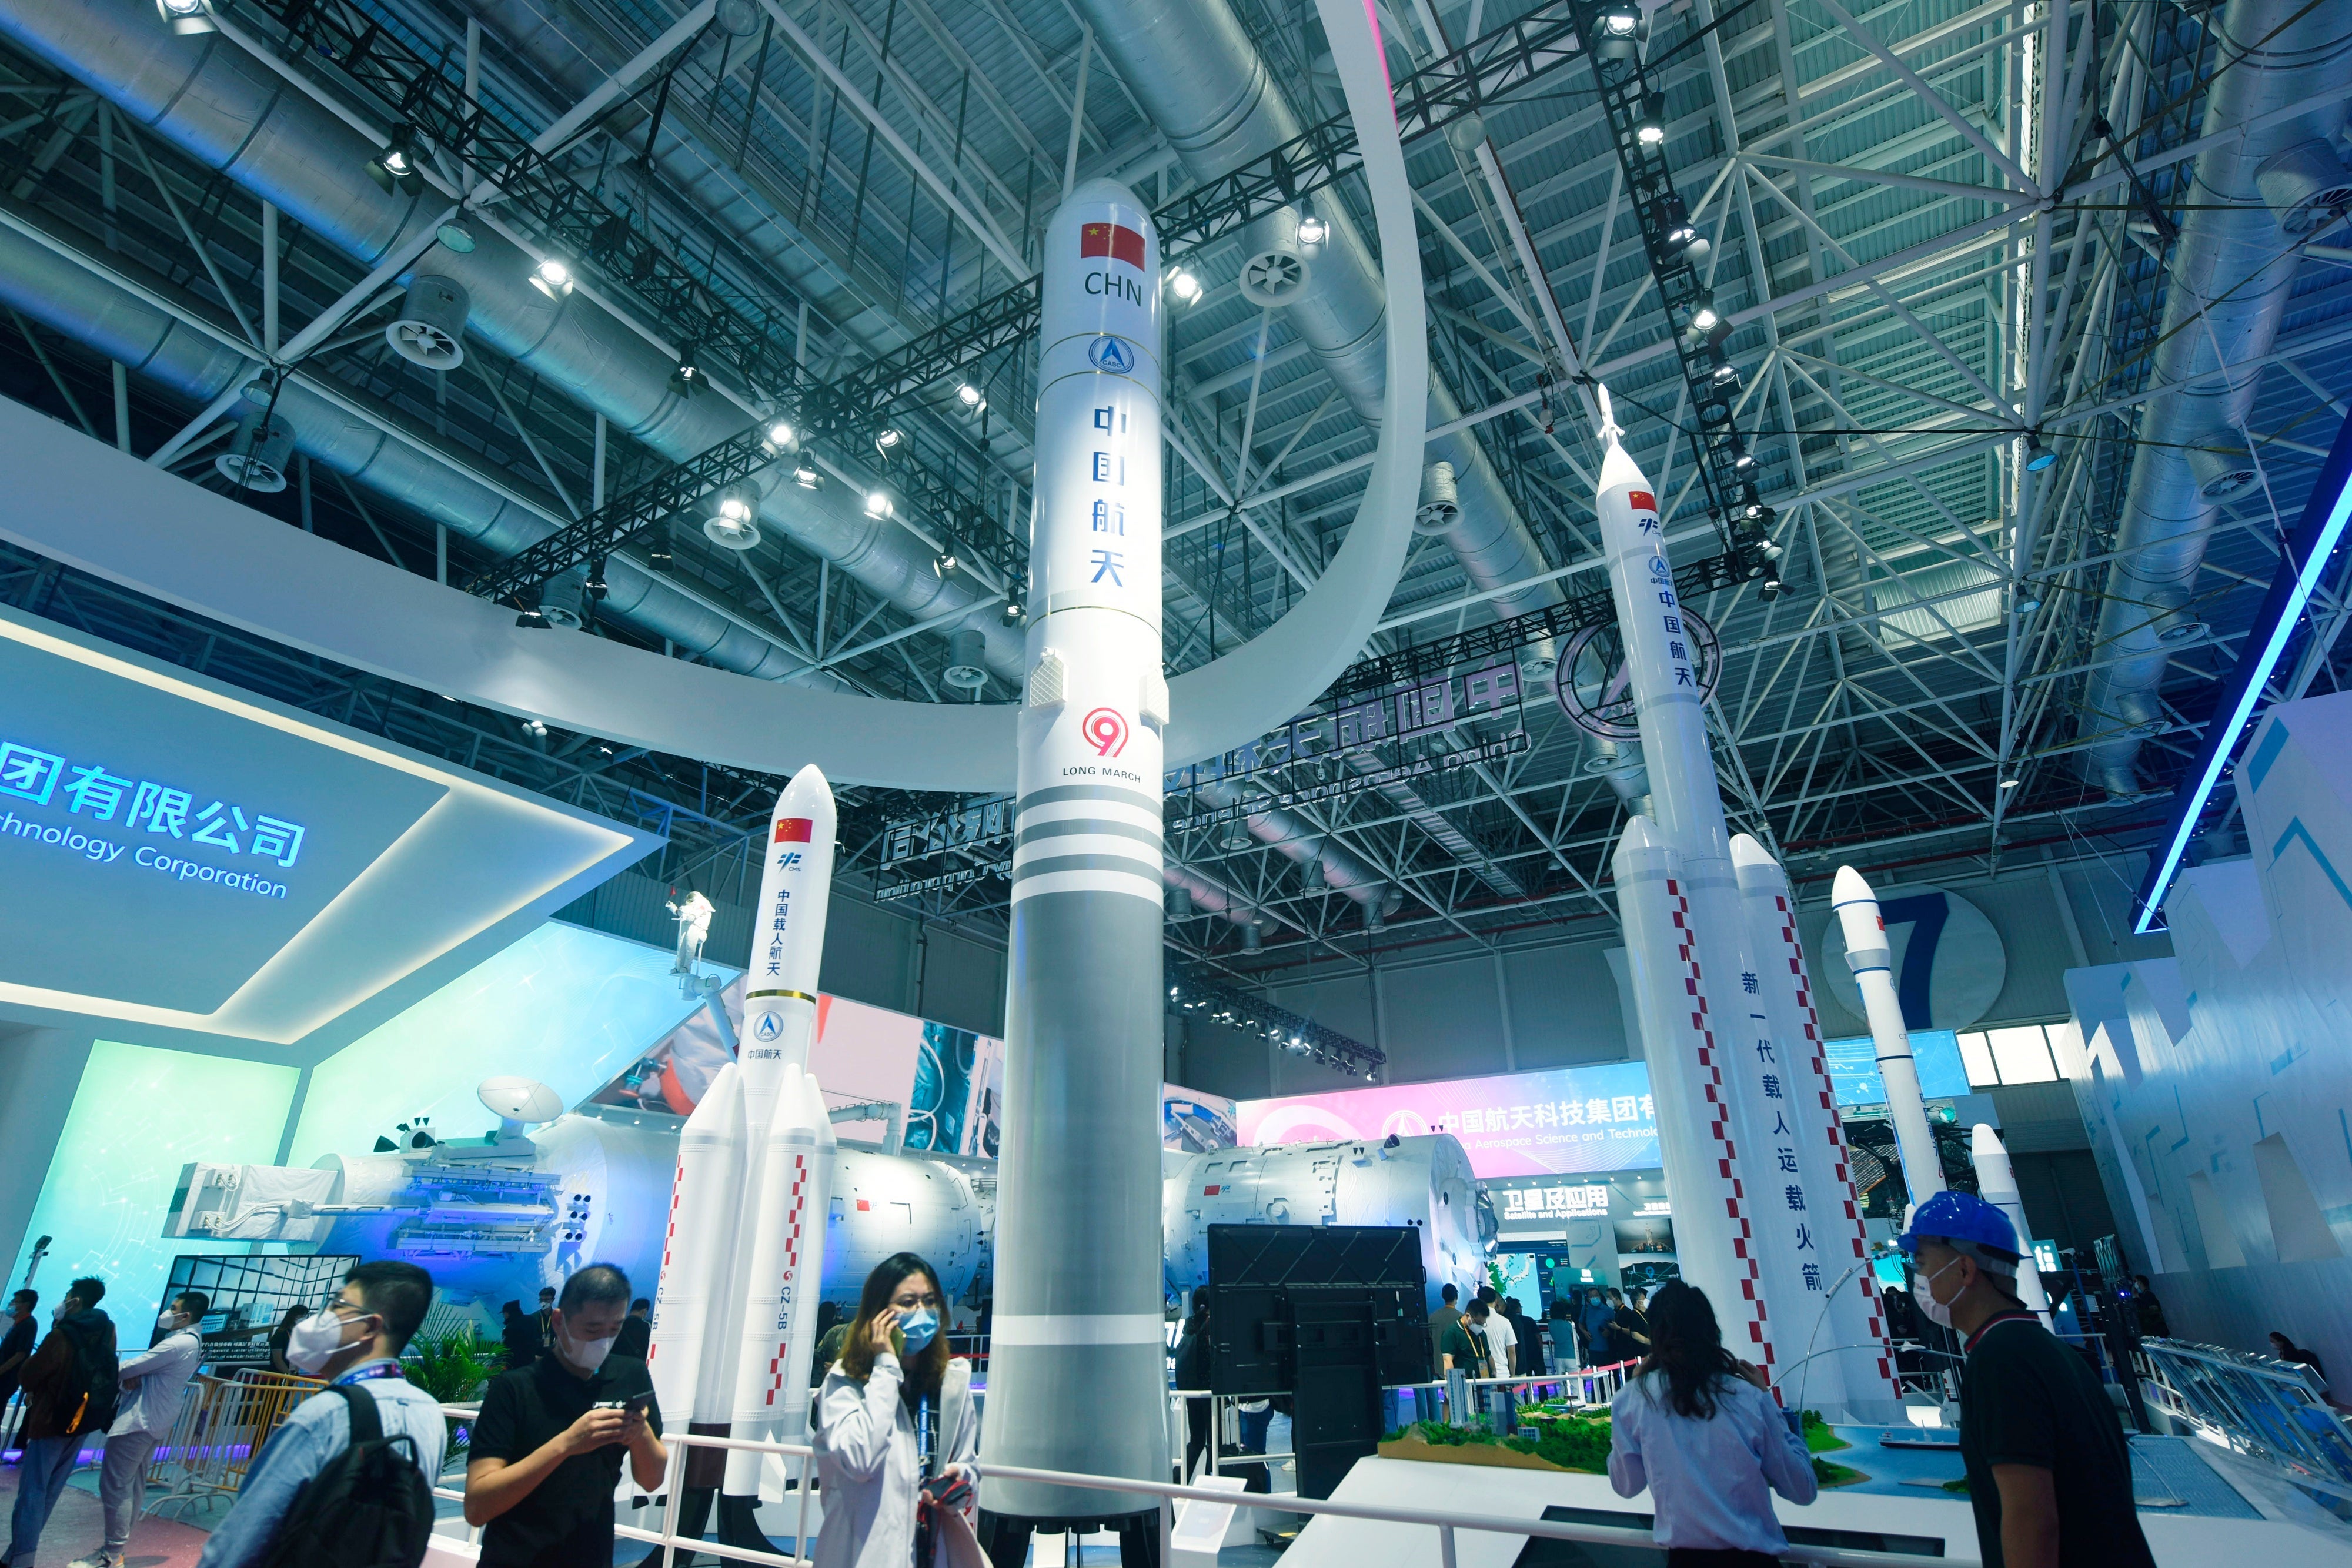 Models of future Long March rockets, as shown during the 2022 Zhuhai Air Show. (Photo: FCHNA, AP)